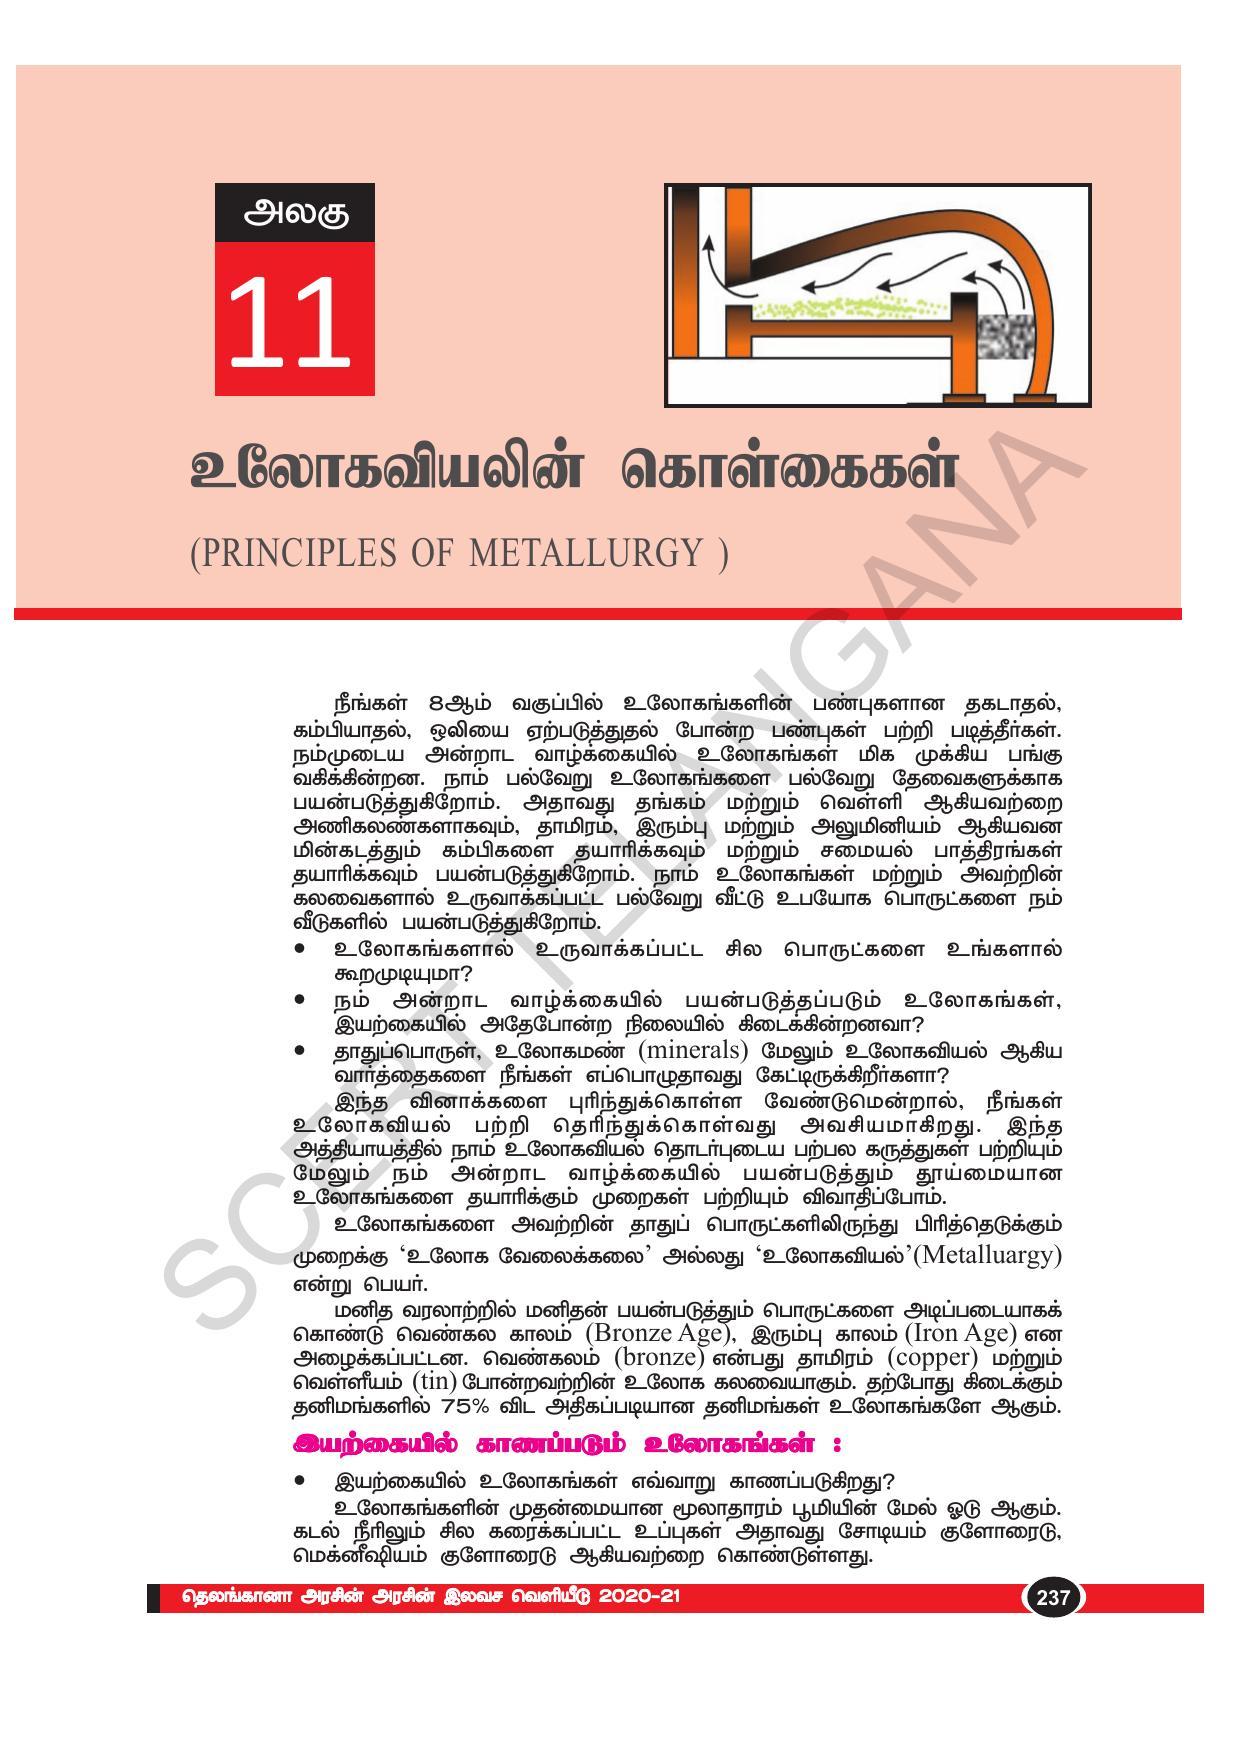 TS SCERT Class 10 Physical Science(Tamil Medium) Text Book - Page 249